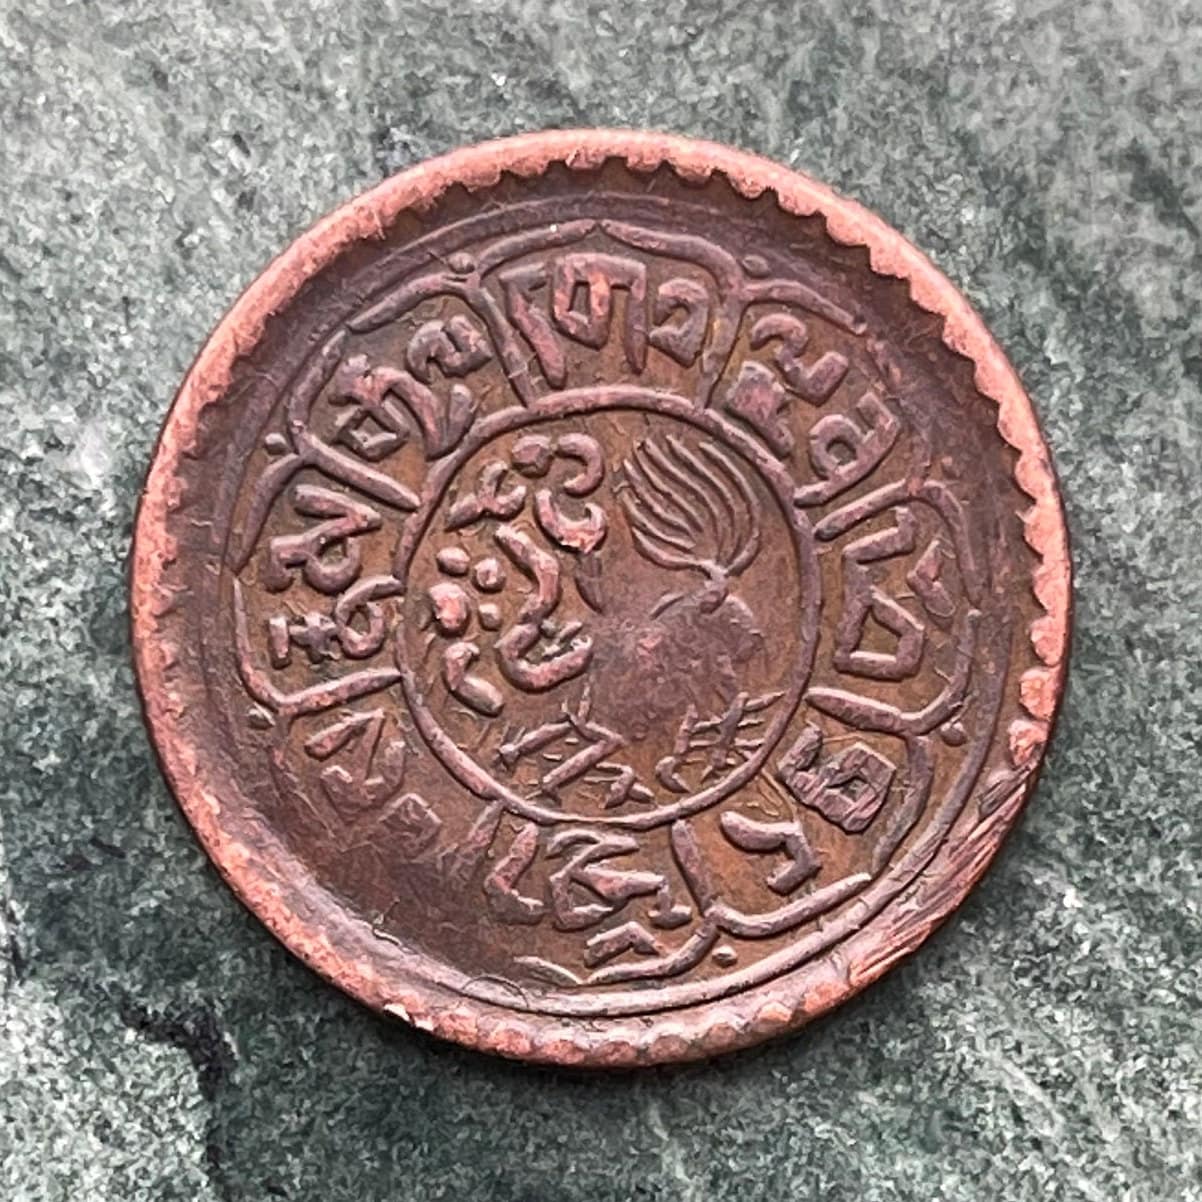 Snow Lion 1 Sho Tibet Authentic Coin Money for Jewelry and Craft Making (Bliss) (Joy) 1918 CONDITION: FINE